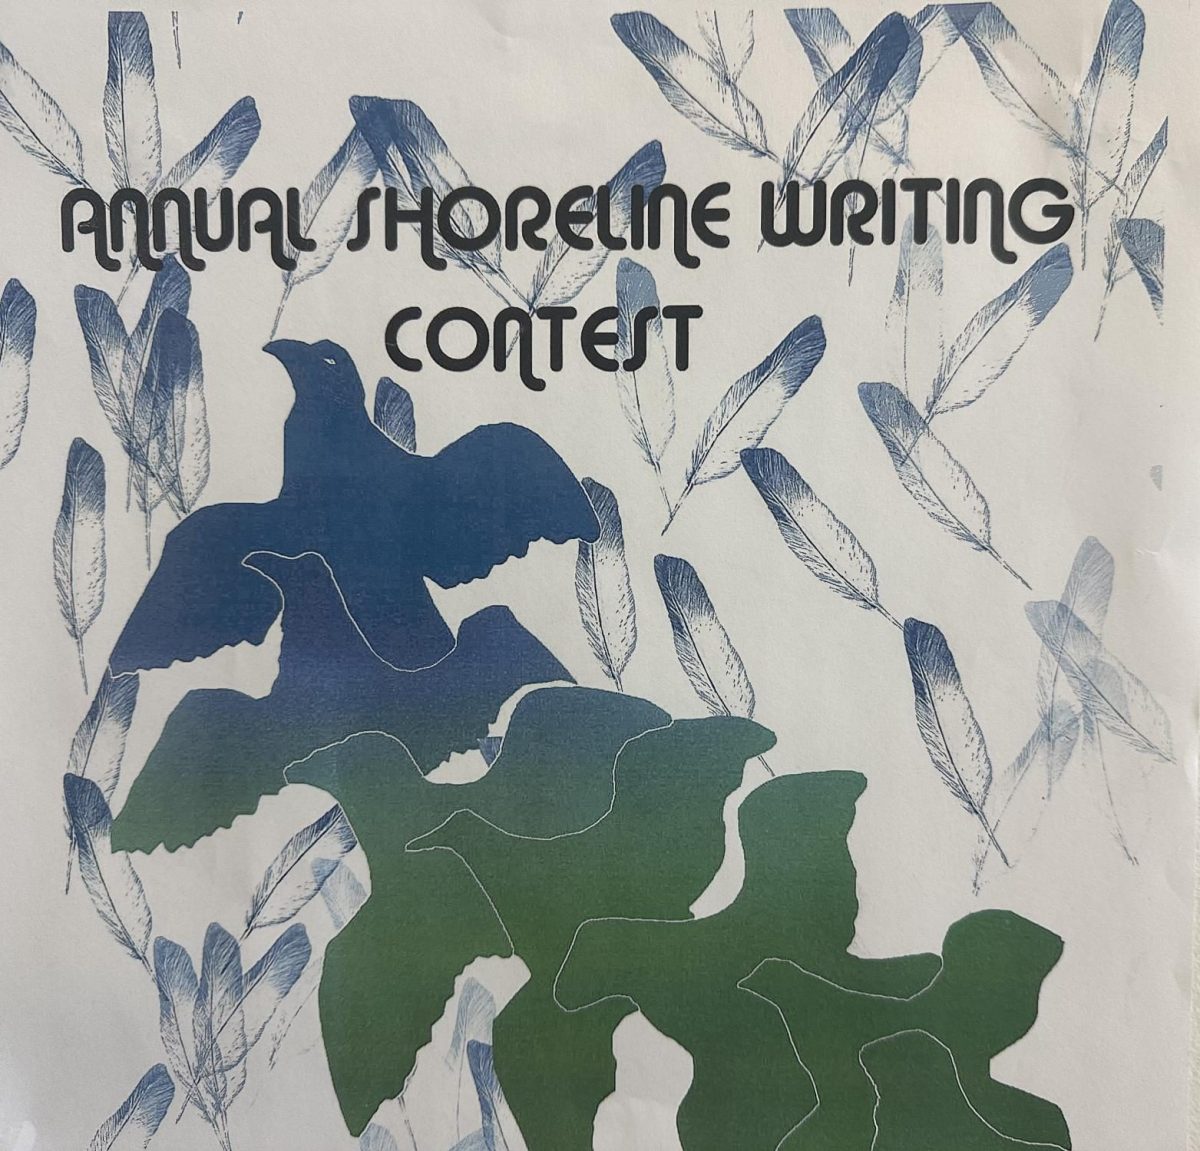 The+42nd+Annual+Shoreline+Writing+Contest